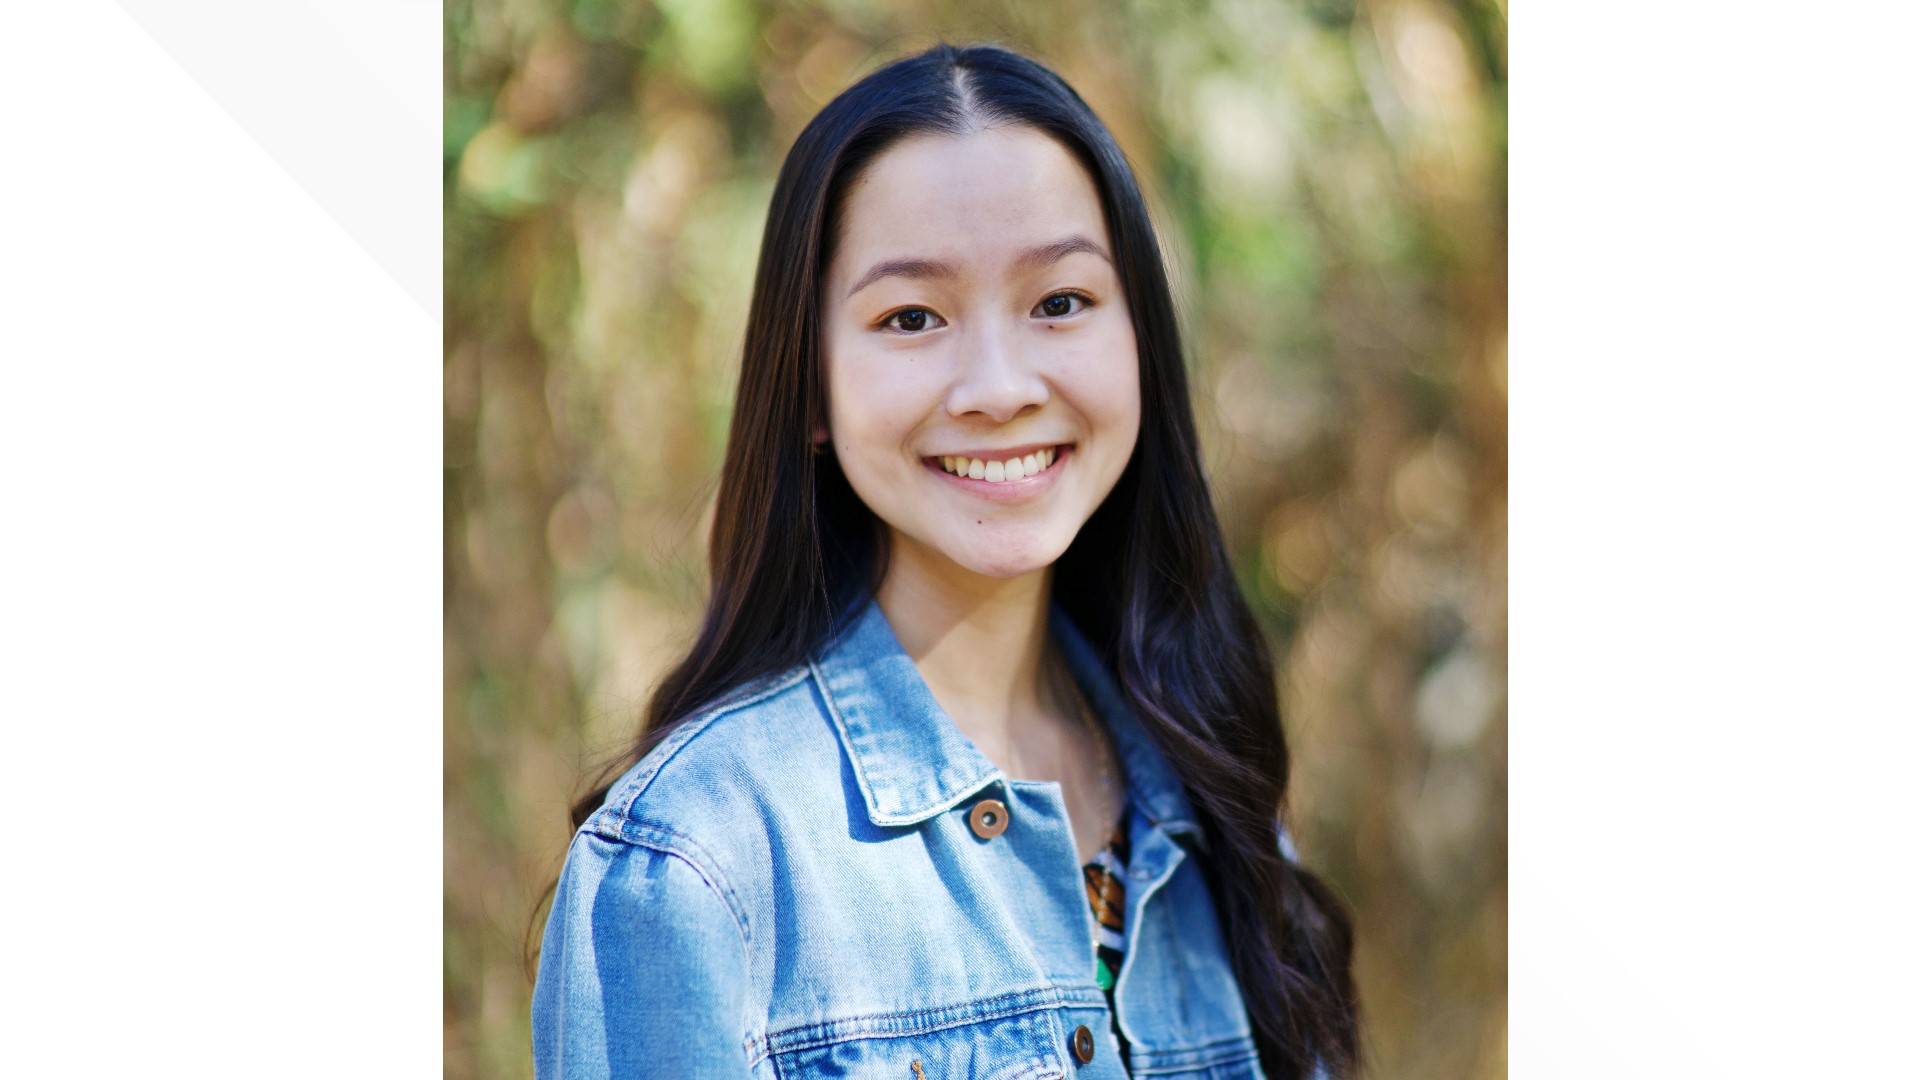 Alexandra Huynh, 18, is a second-generation Vietnamese American from Sacramento, California, who sees poetry both as a means to self-expression and social justice.